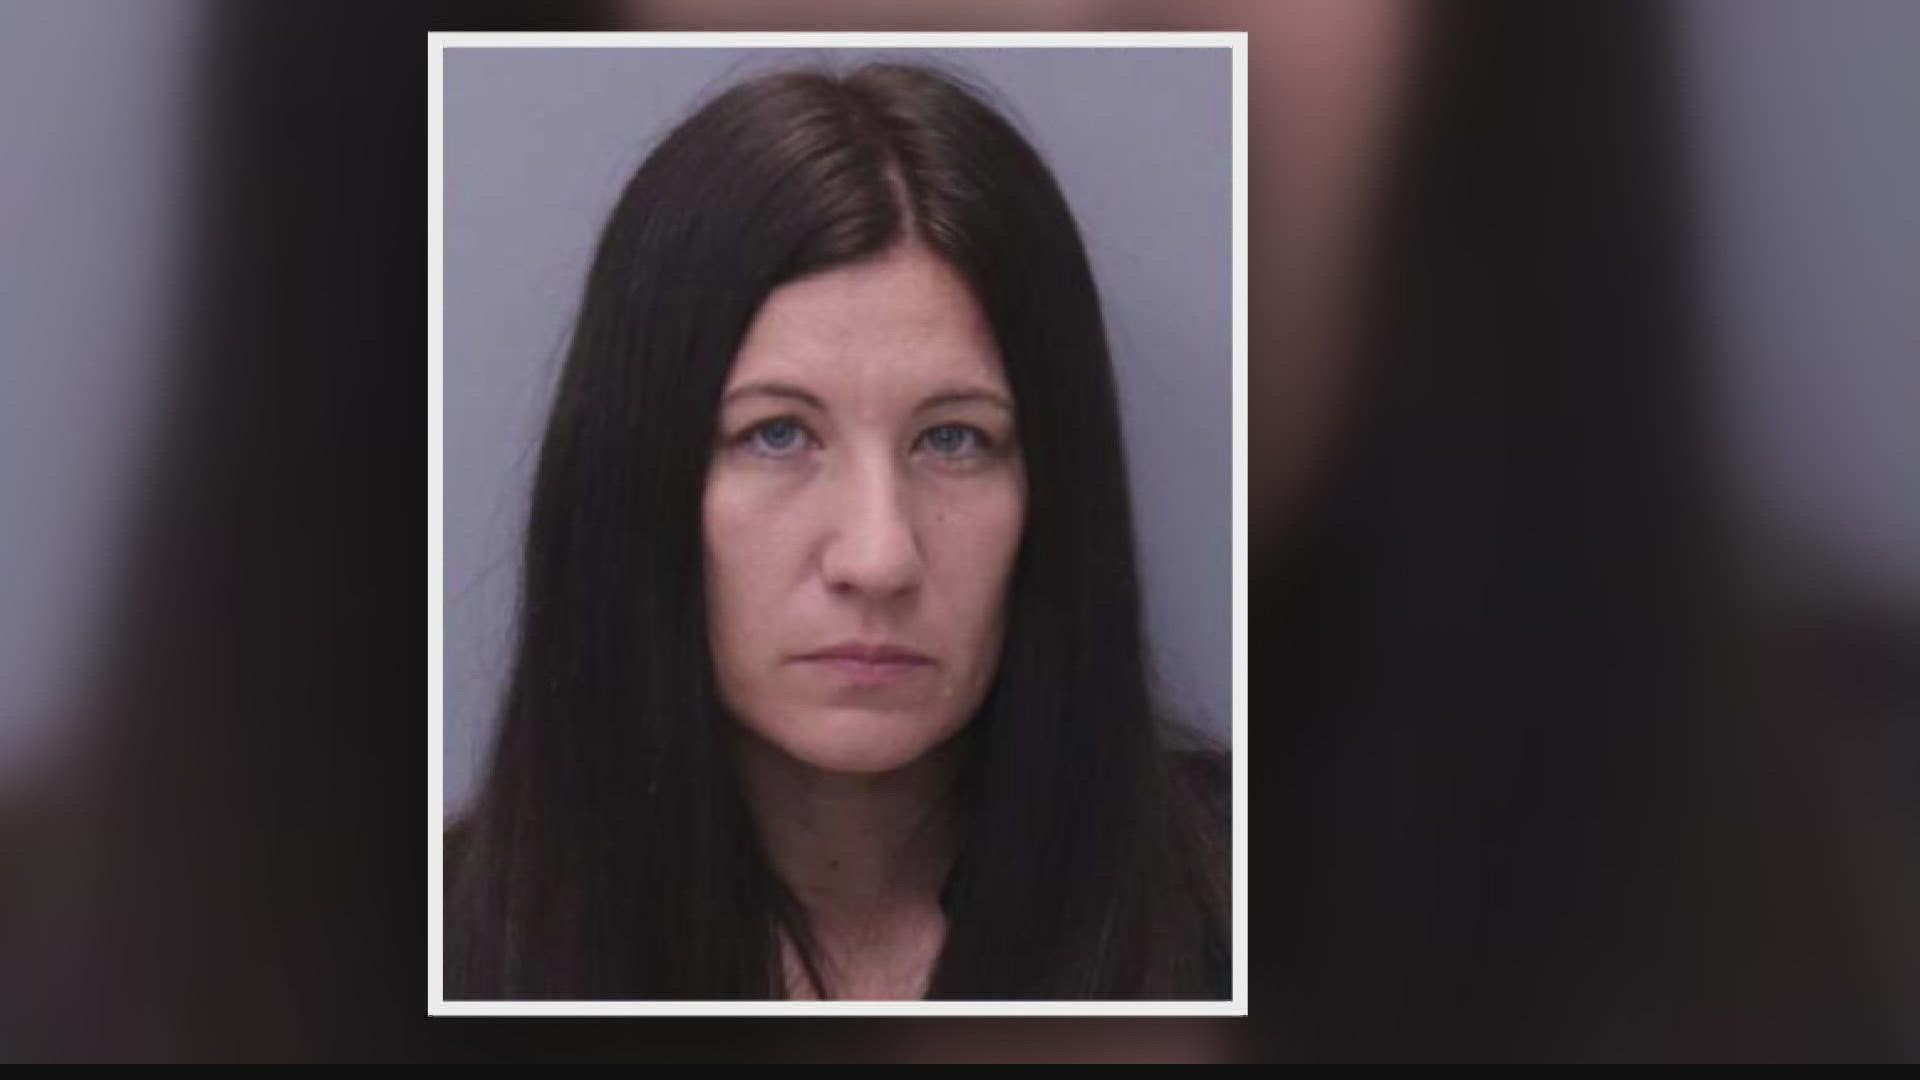 She is accused of washing blood out out of her son's jeans hours after Bailey's death.